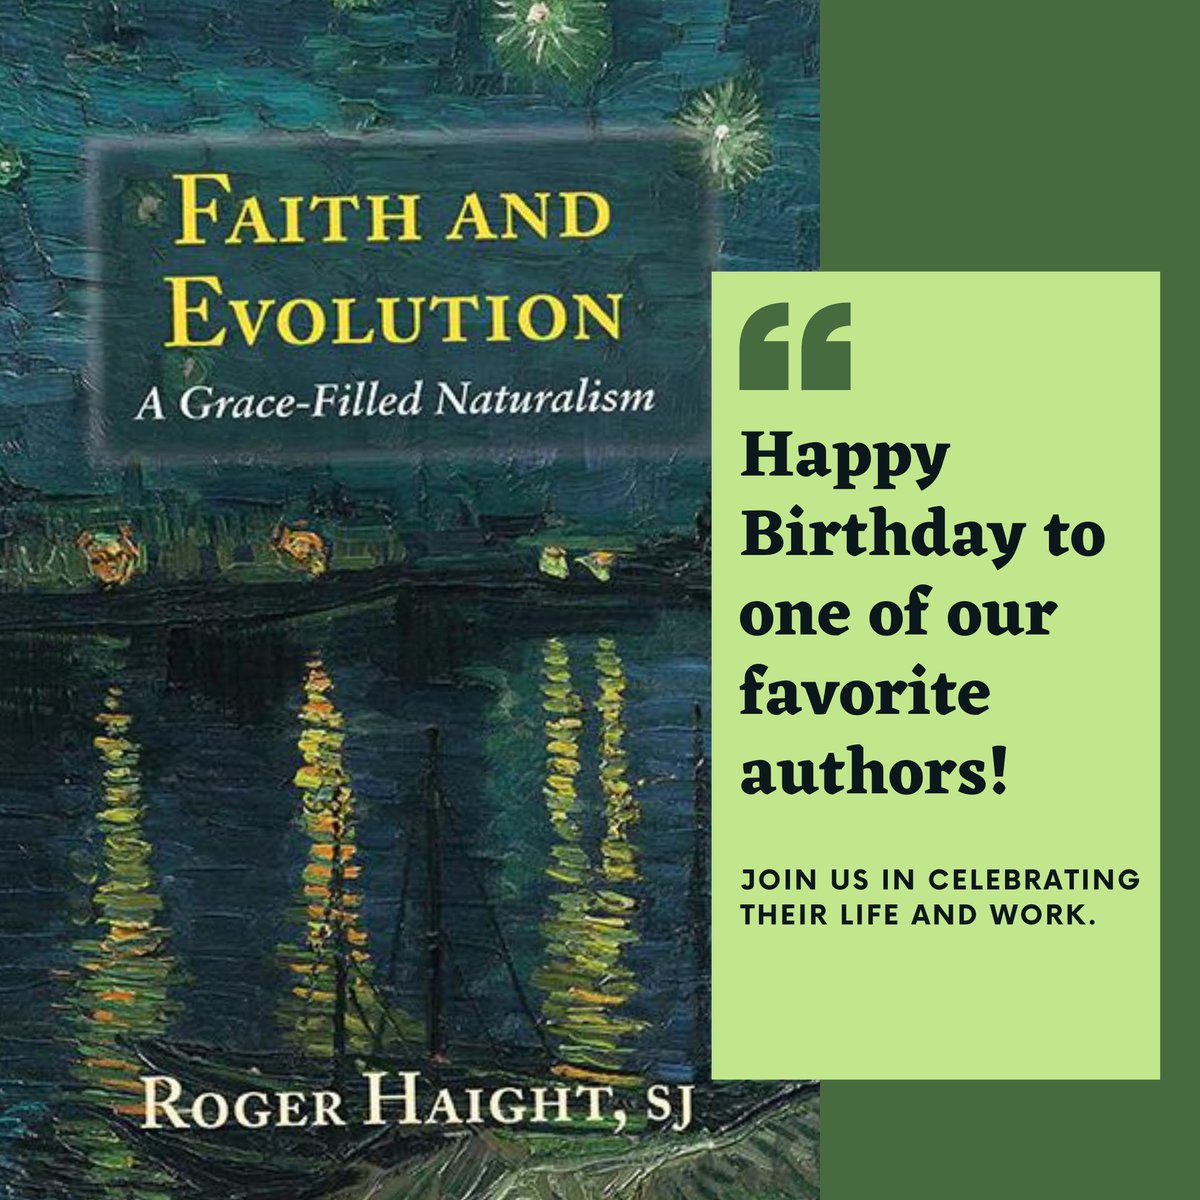 This book asks what science can teach Christian Theologians about our own self-understanding. #authorbirthday #happybirthday #rogerhaight